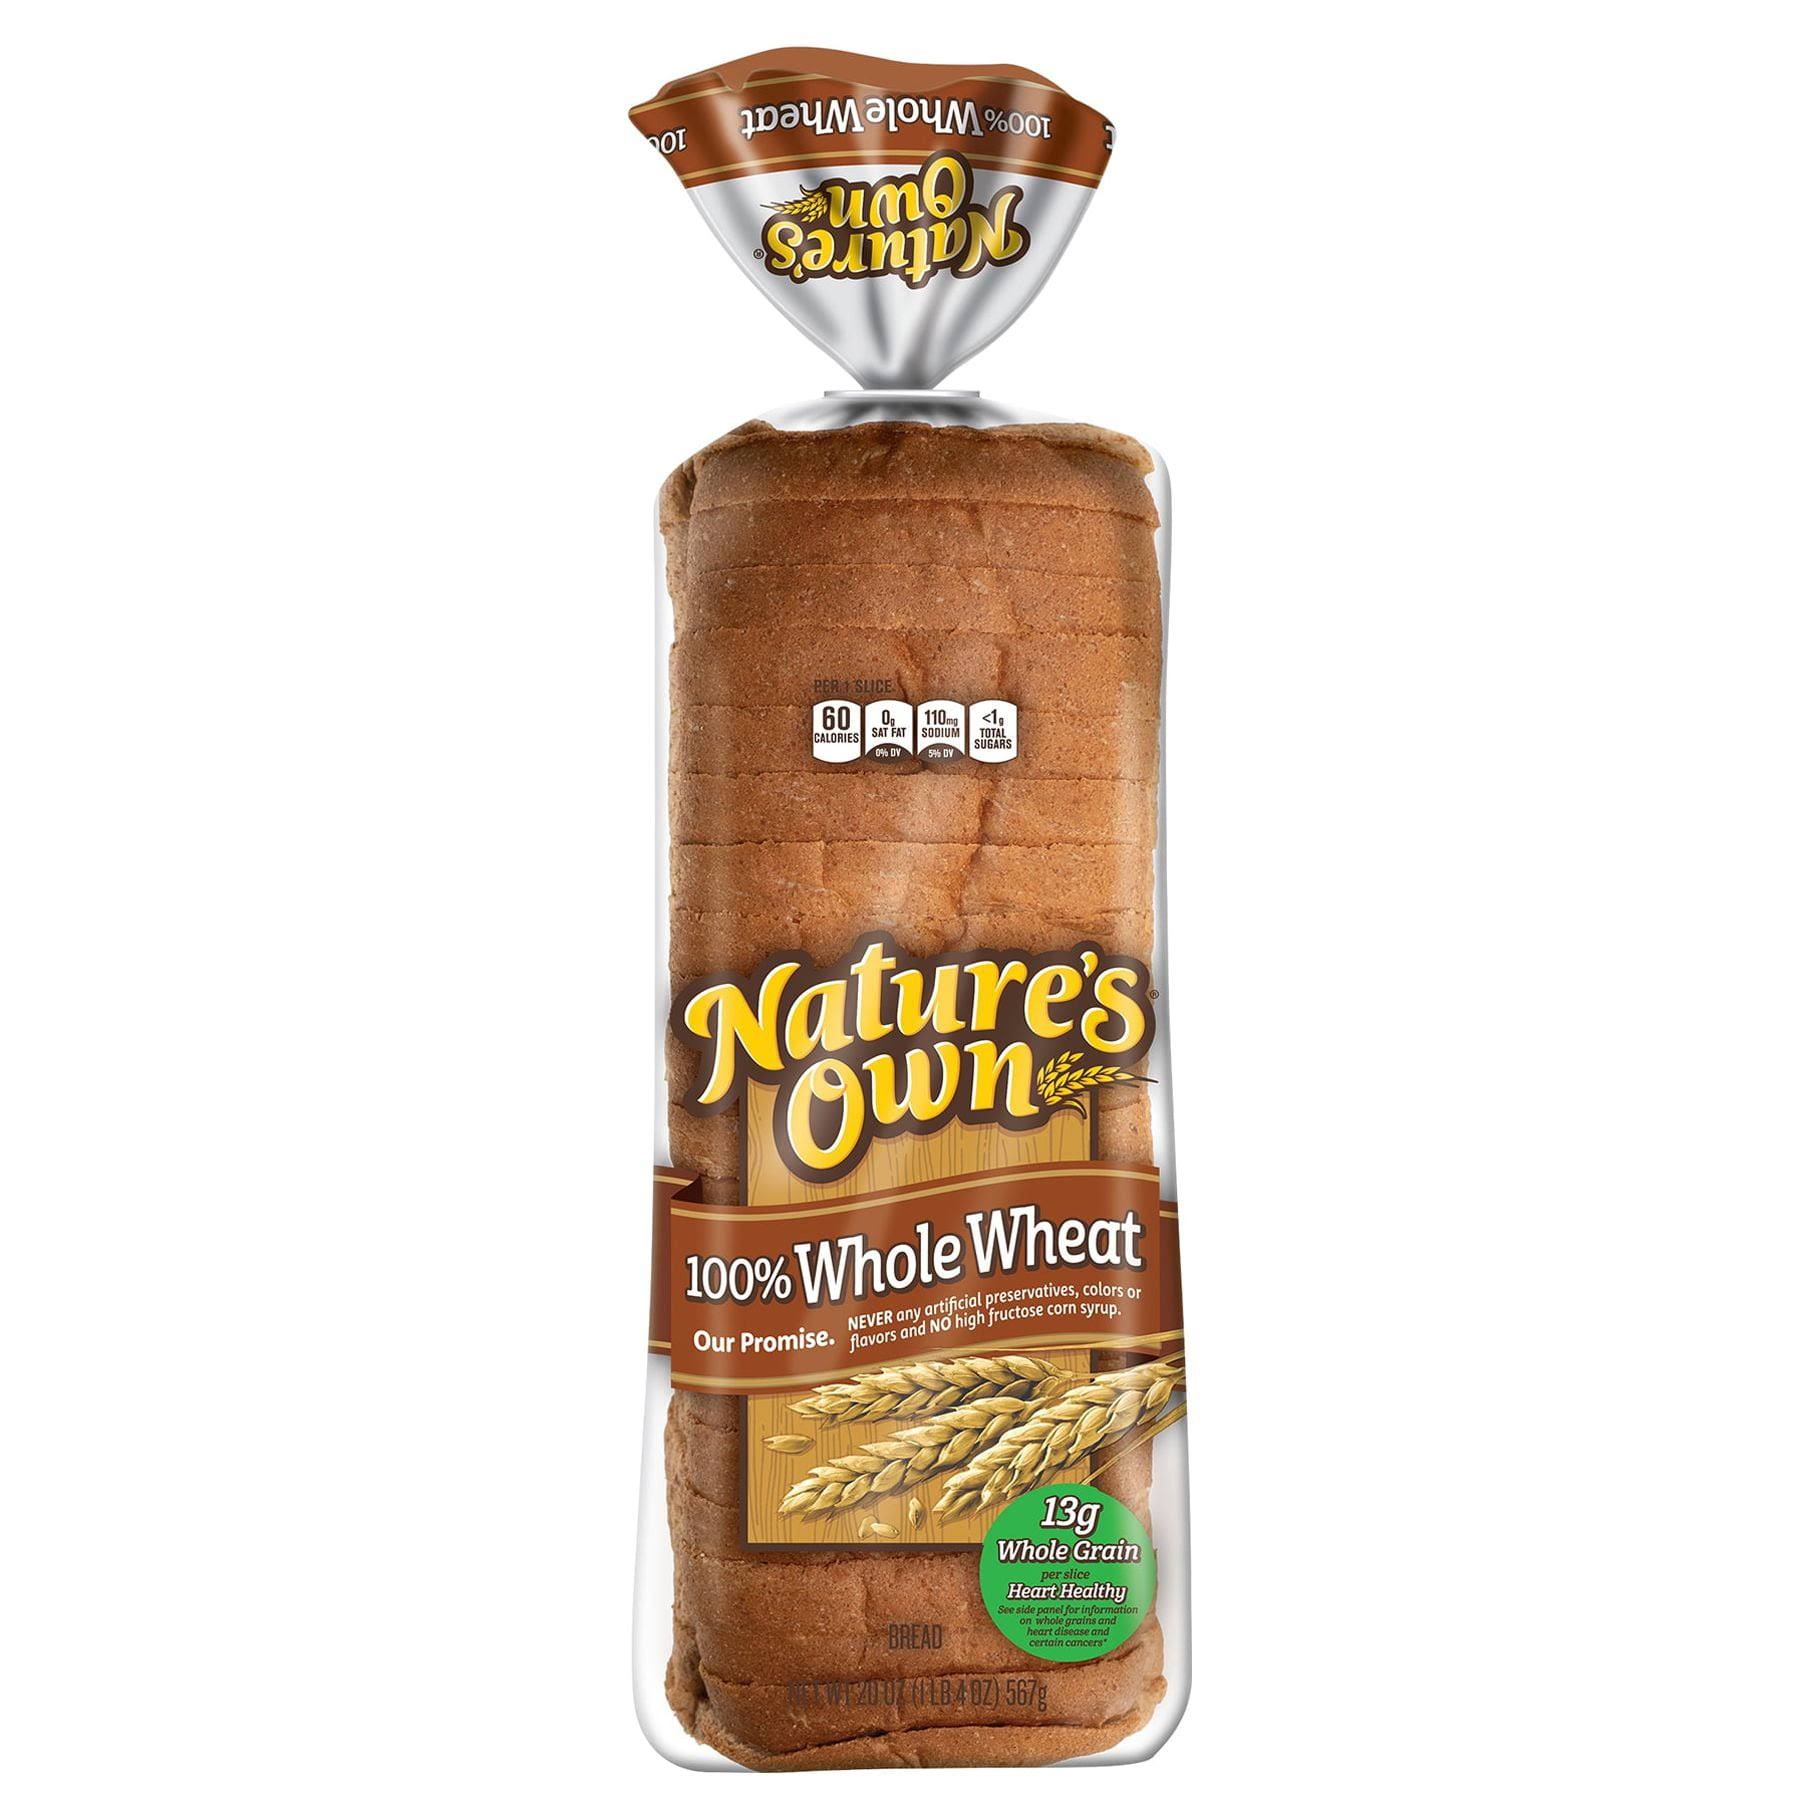 Natures Own 100% Whole Wheat Bread